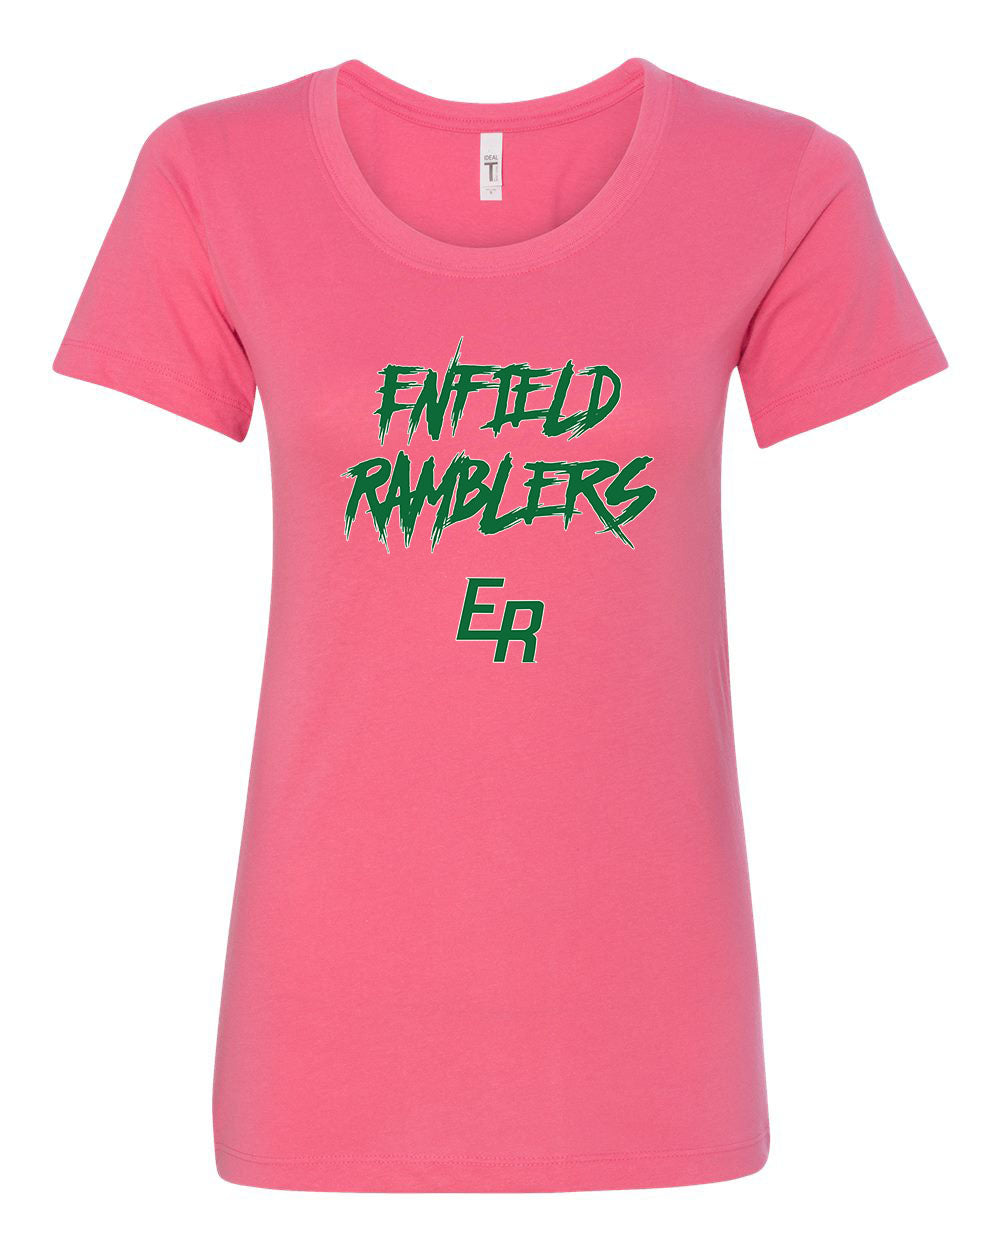 Ramblers Women's Next Level Ideal T-Shirt "Scratch" - 1510 (color options available)